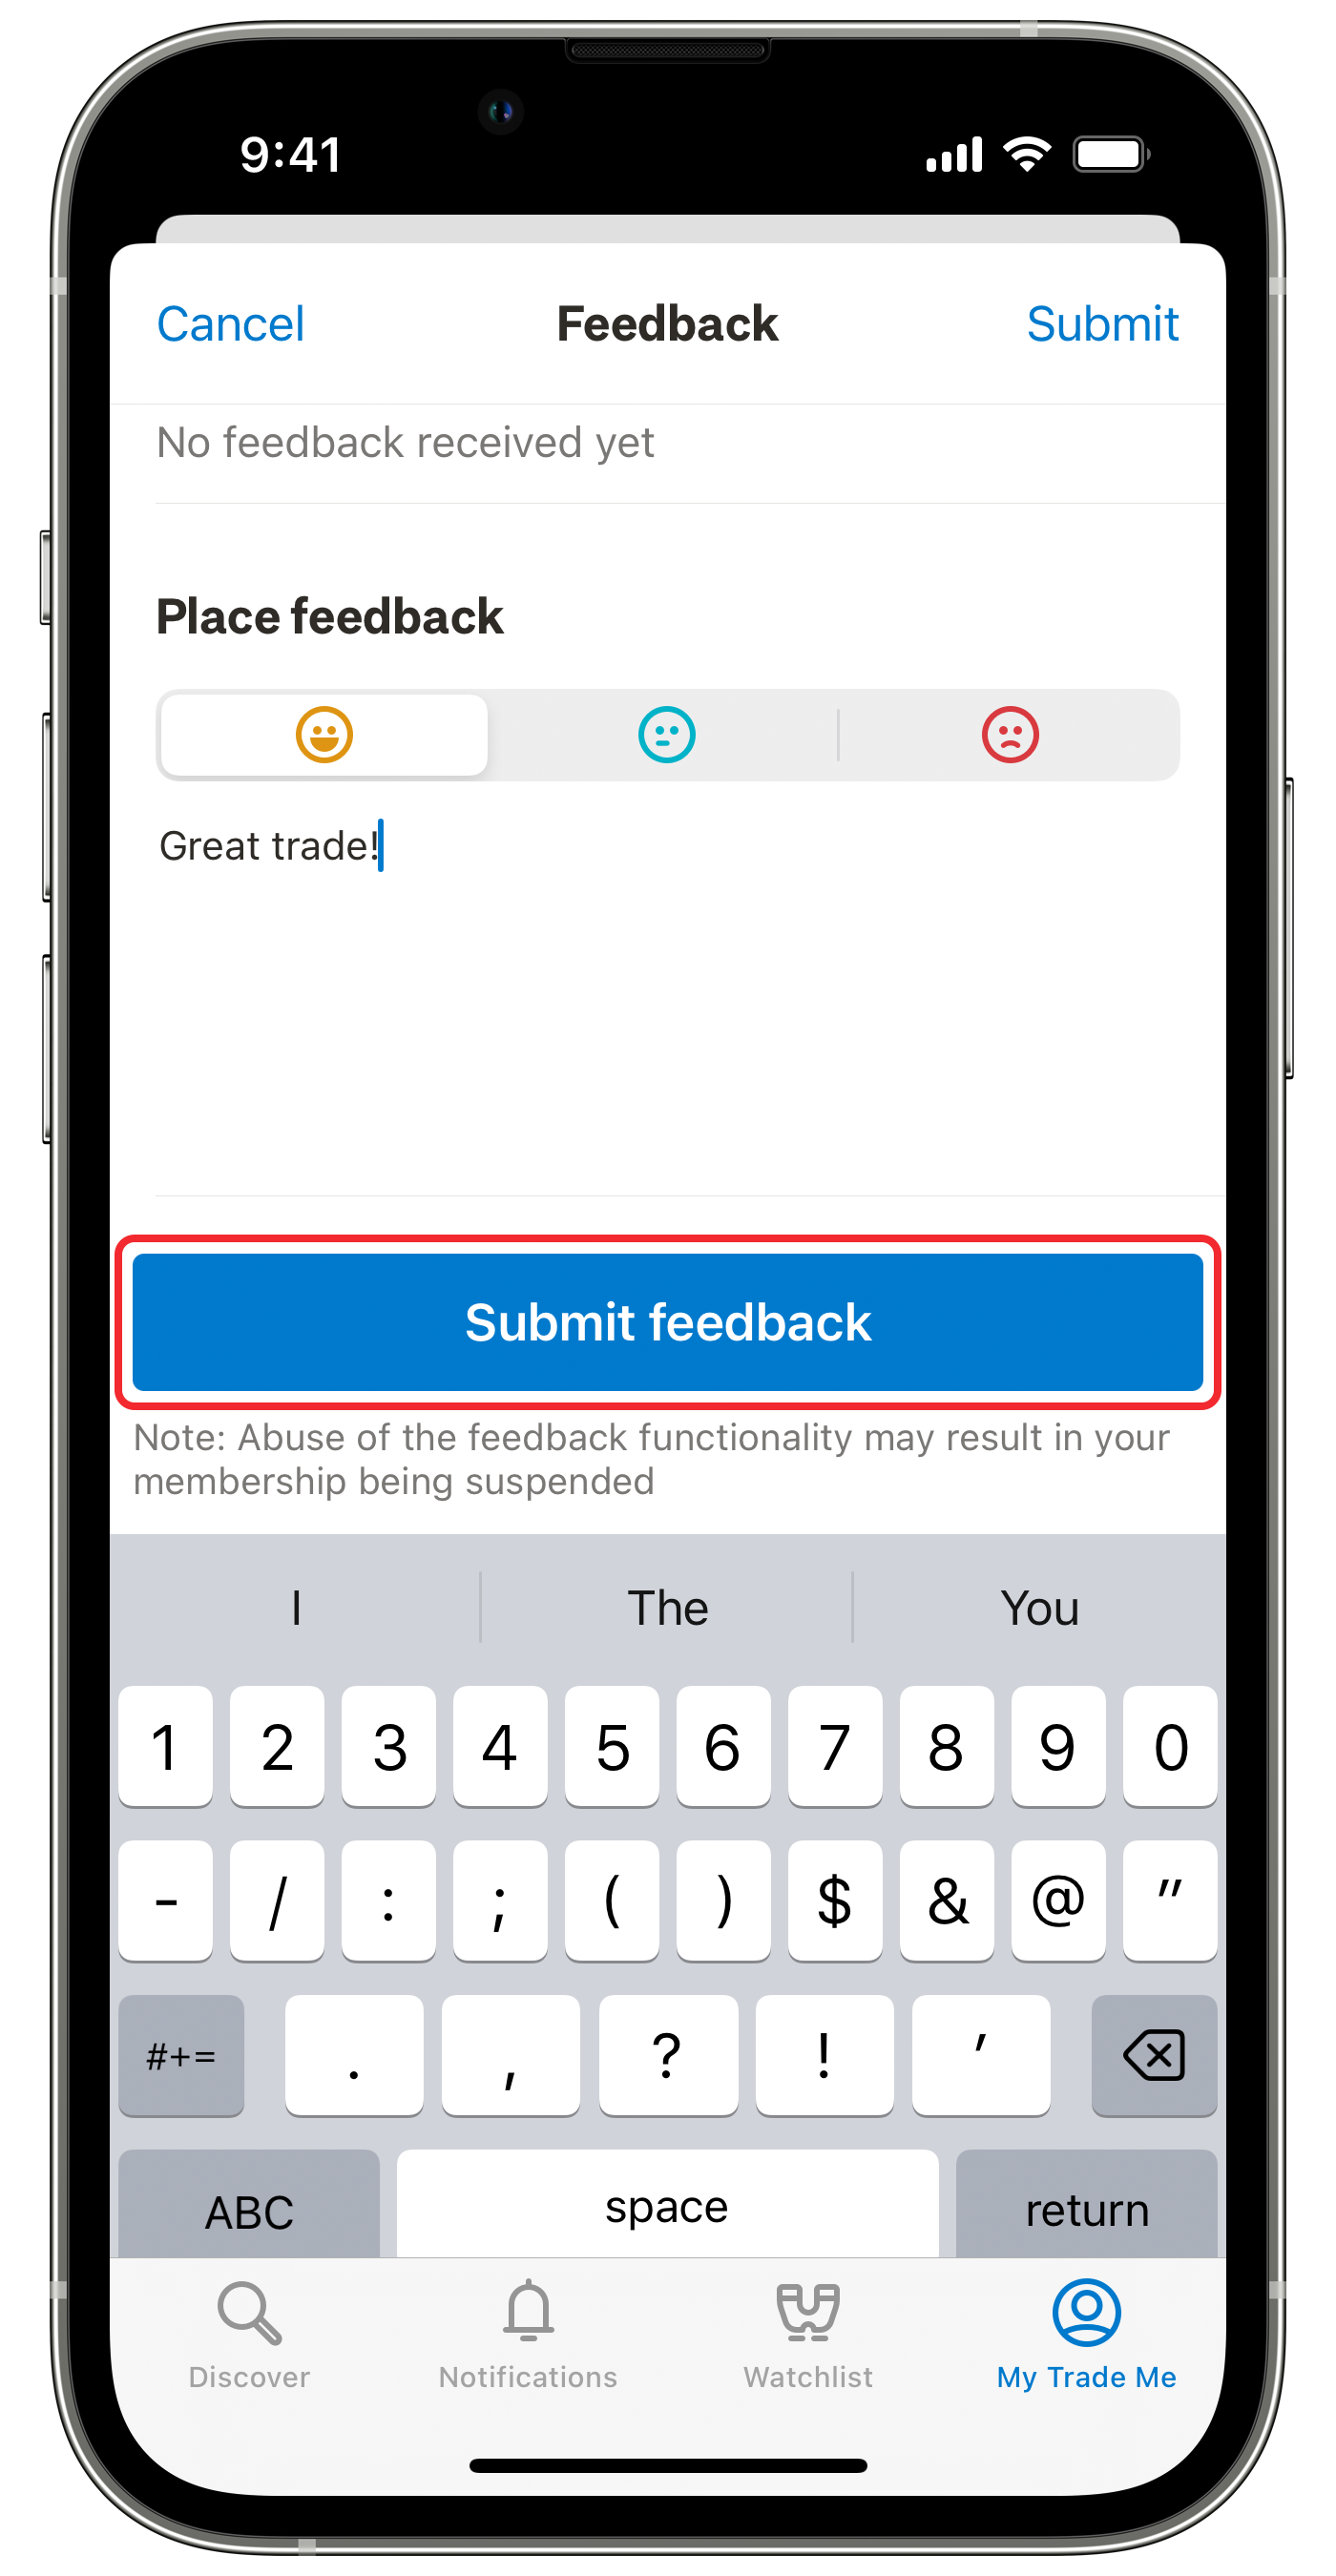 Submitting_feedback_-_iOS_app.png